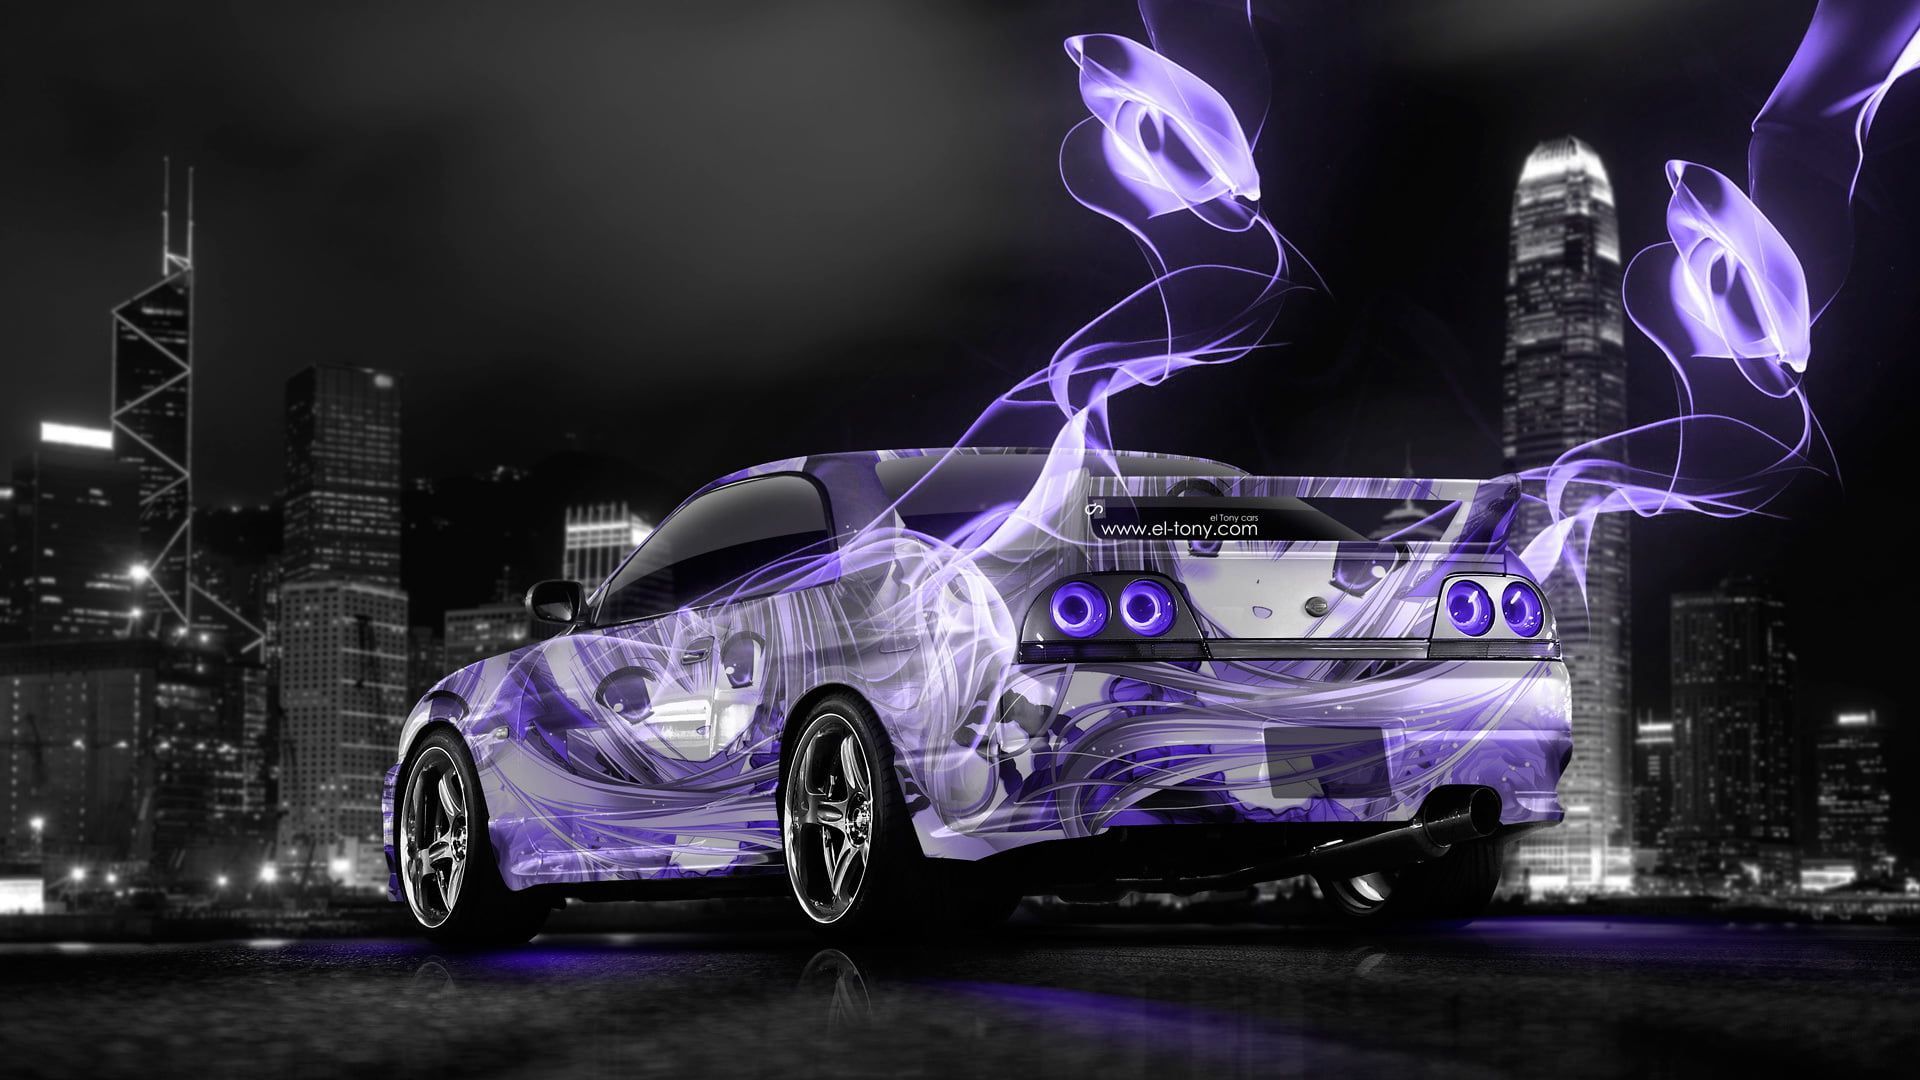 gray and purple sports coupe digital wallpaper #Night The city #Neon #Girl #Nissan #Wallpaper #GTR #City #A. Sports coupe, Digital wallpaper, Photohop wallpaper